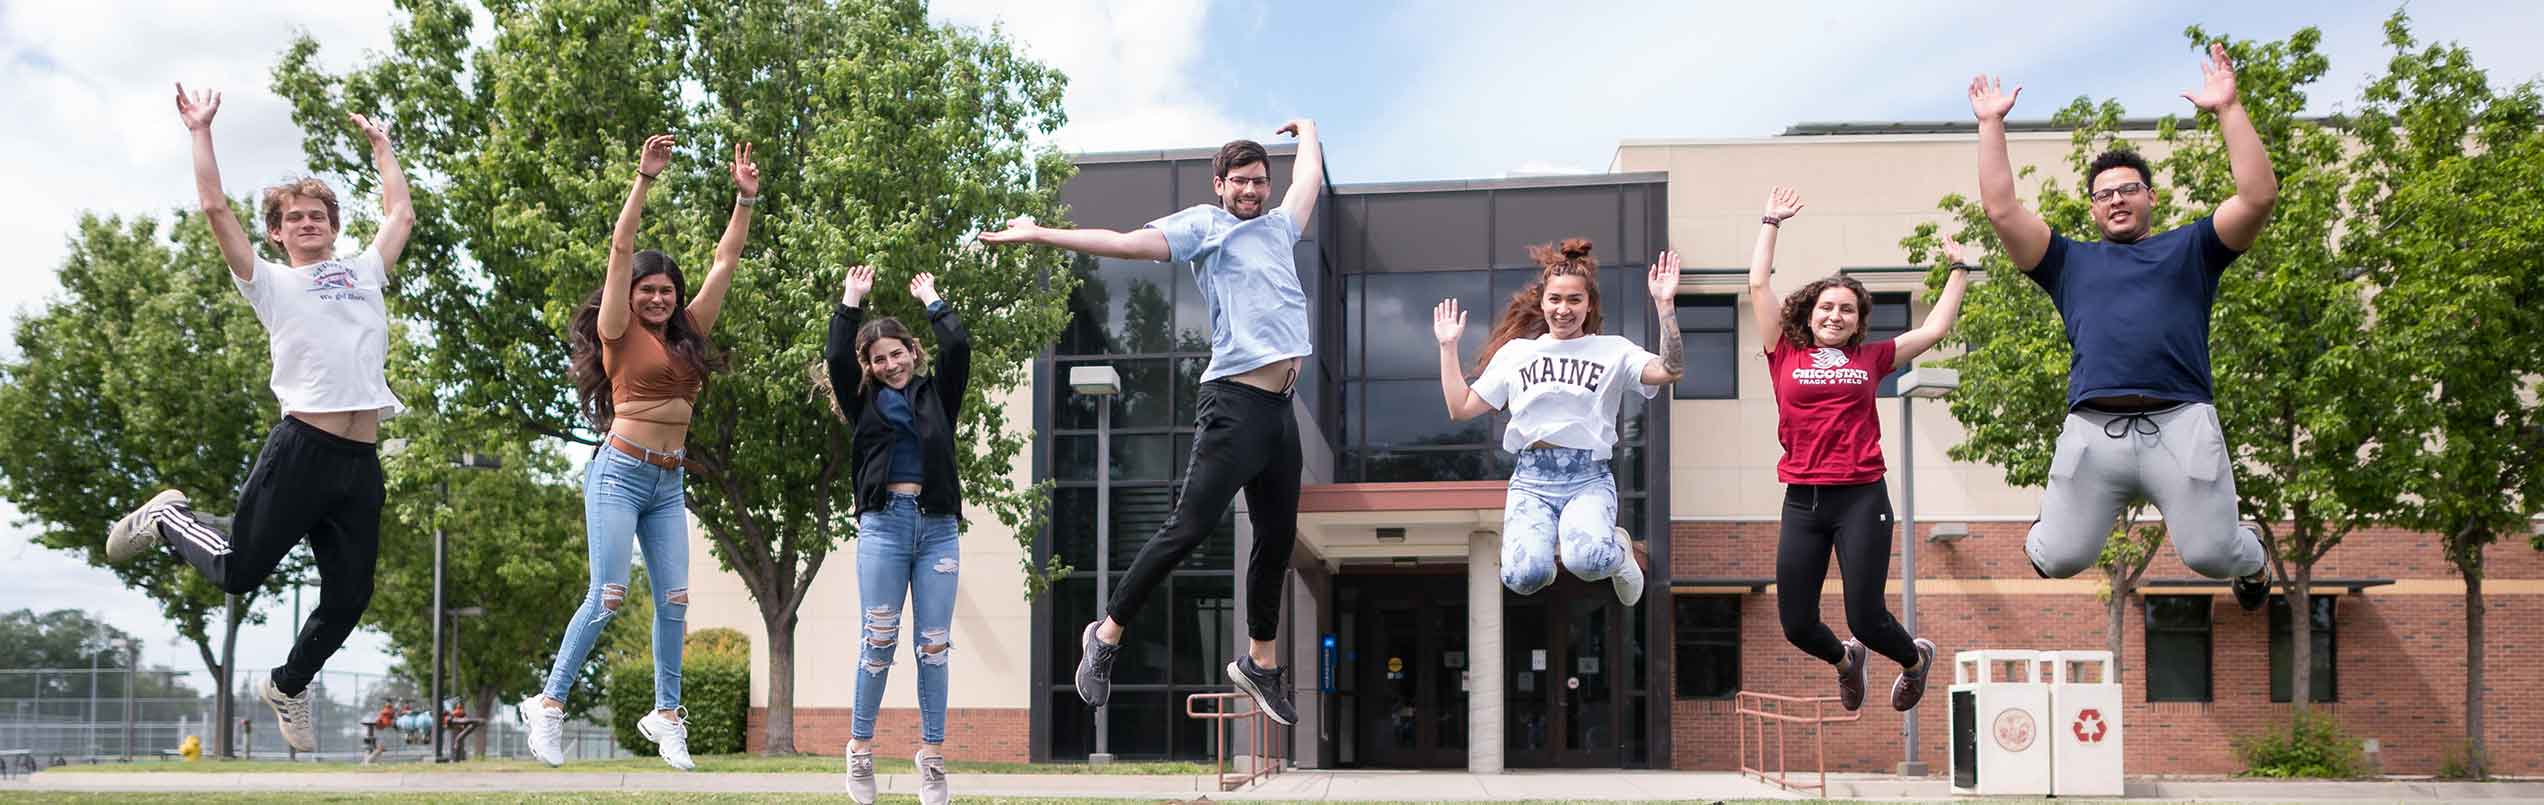 students jumping for photo on Yolo Hall lawn